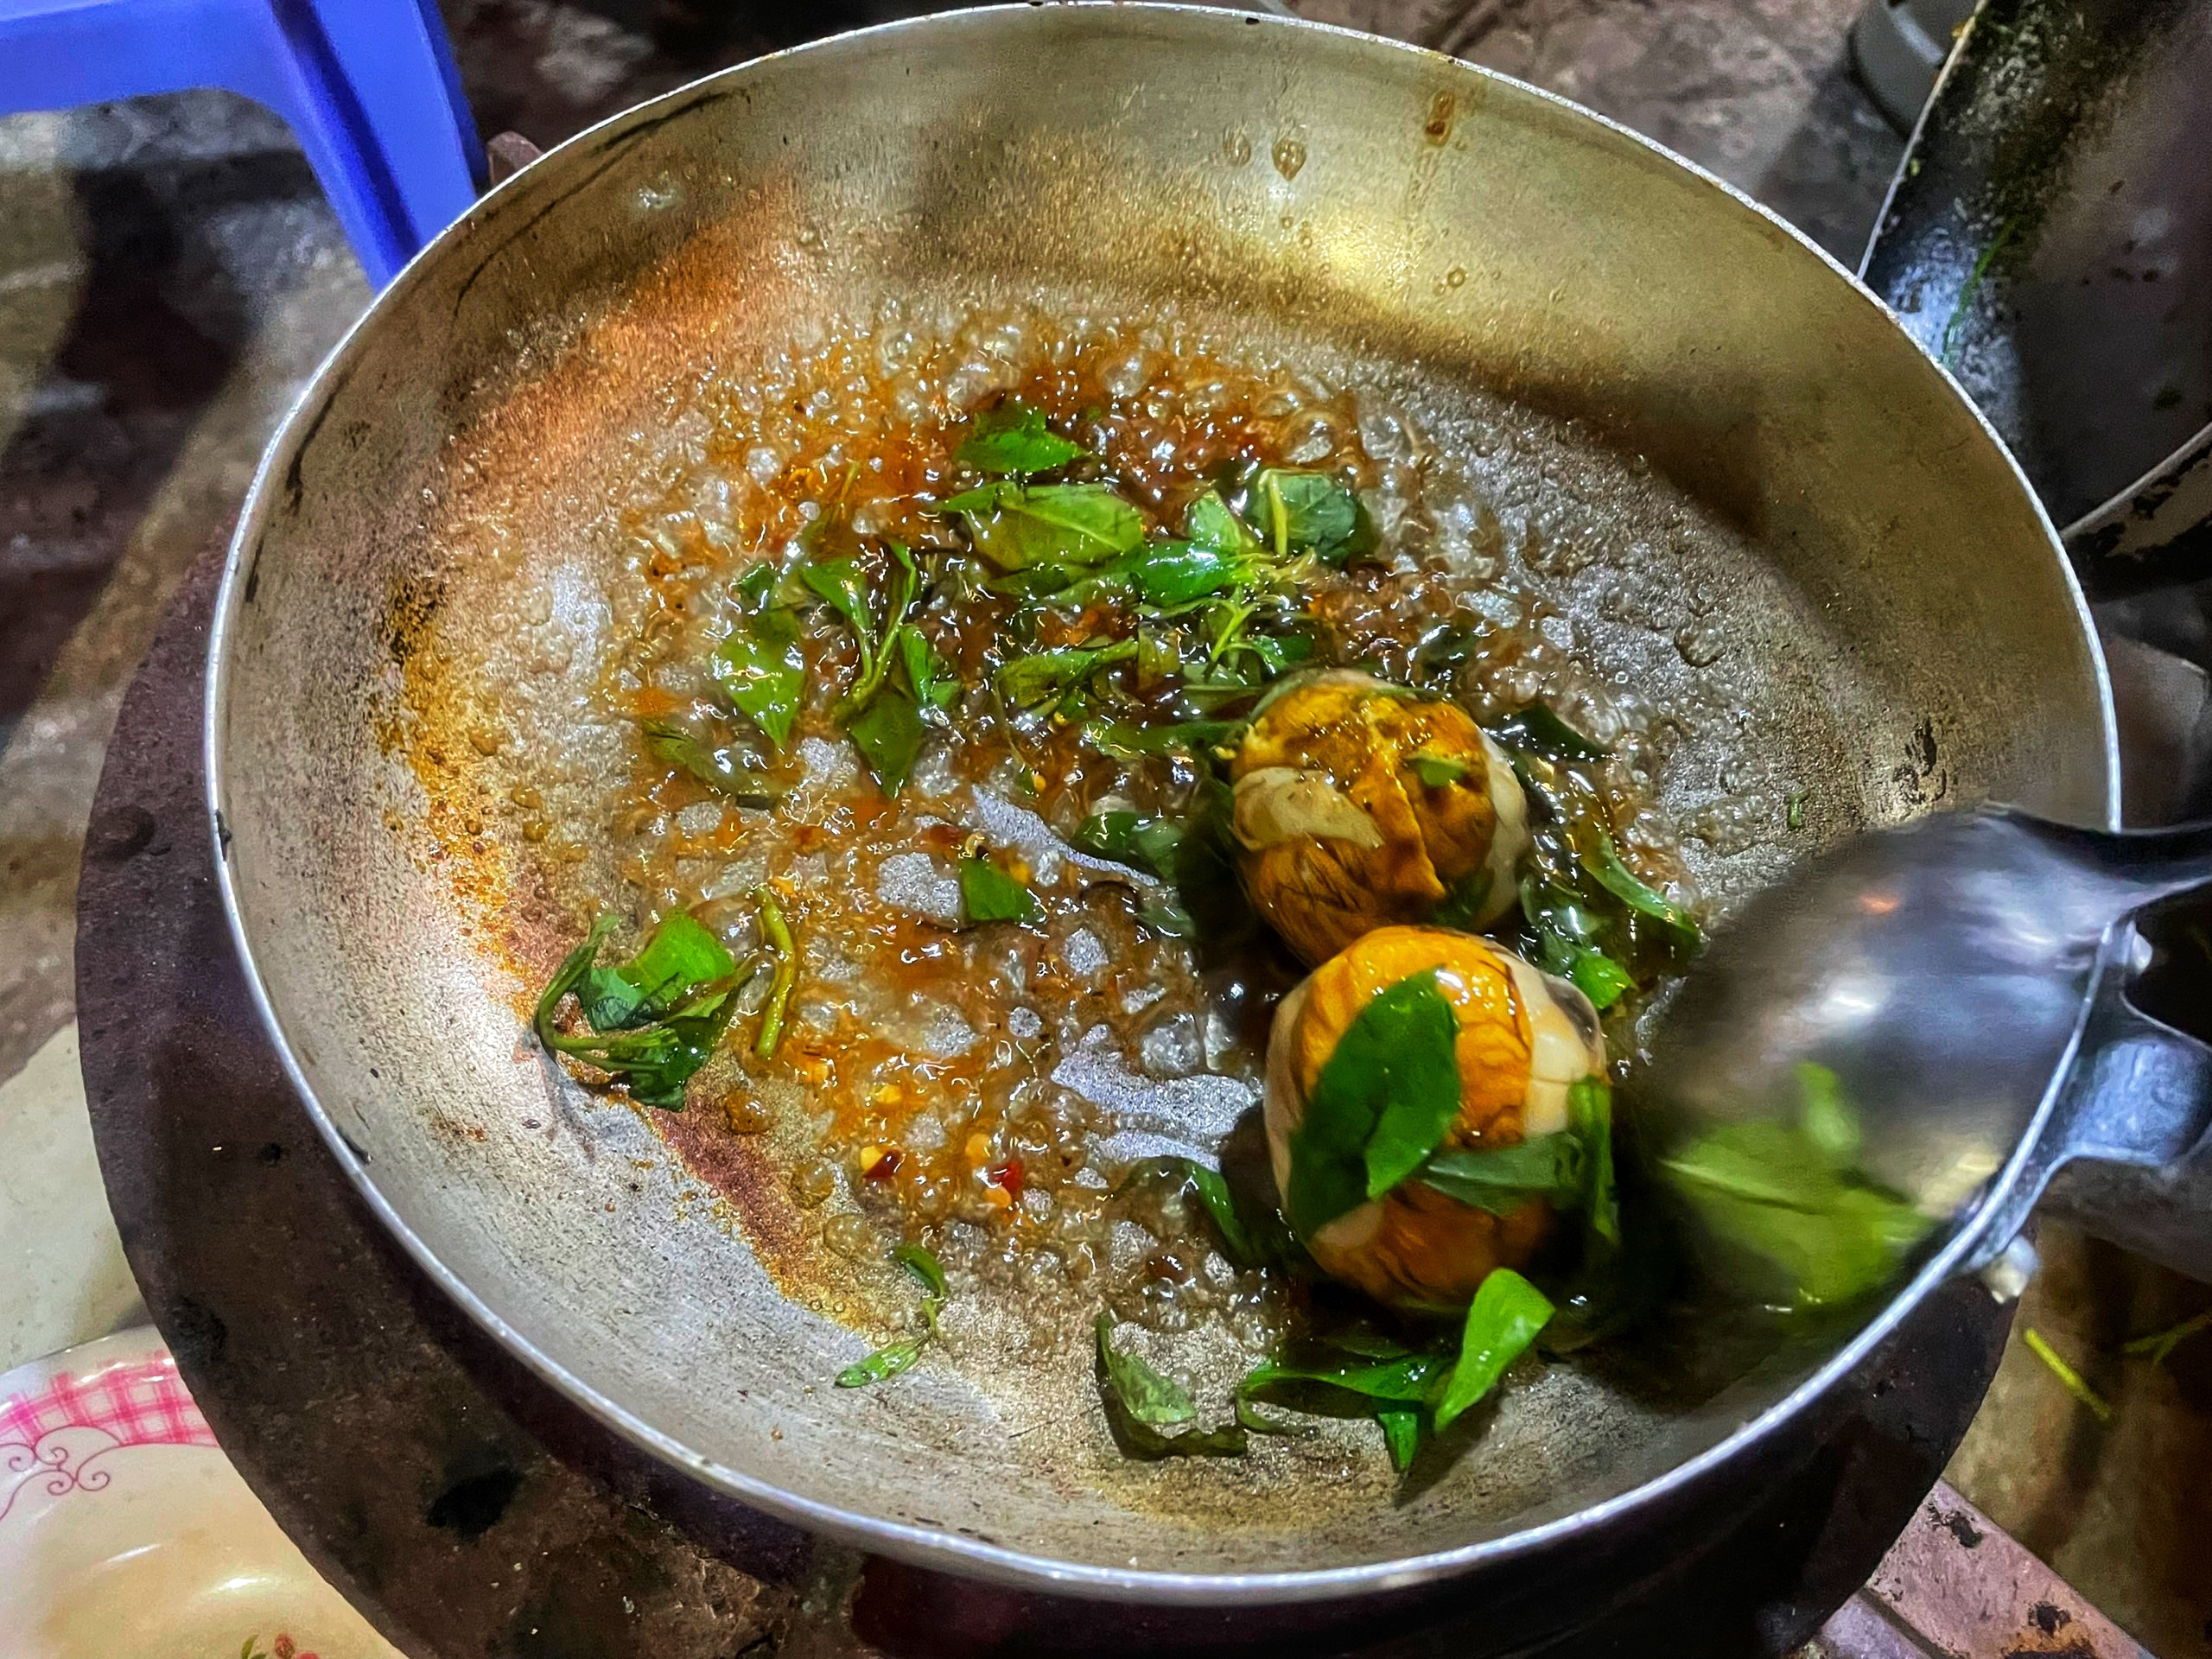 'The solid oval eggs are dropped into a pan and heated in a mixture of the sauce and some spices'. Photo: Hoang An / Tuoi Tre News